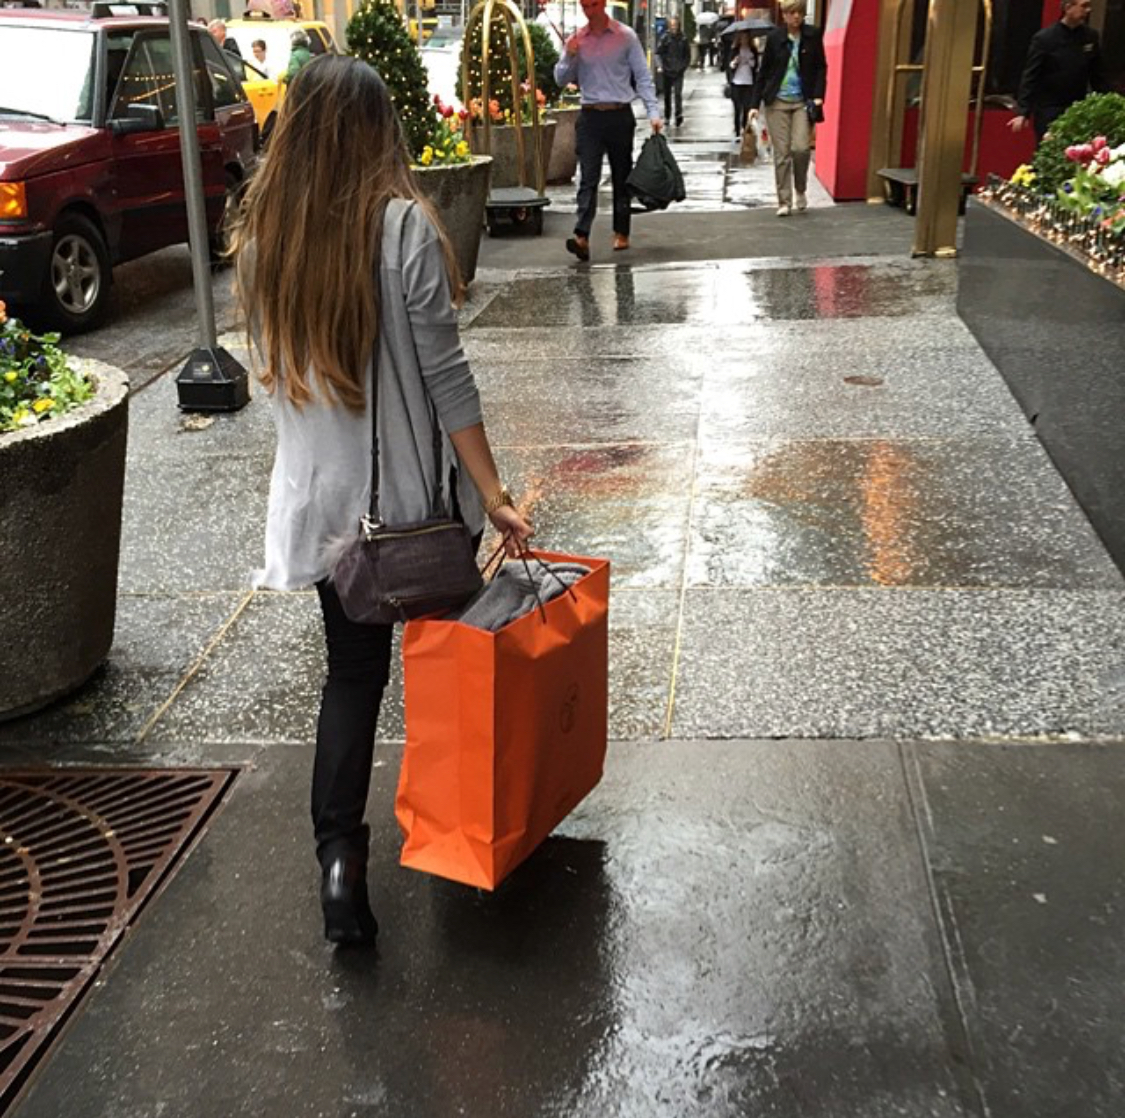 So you want to buy a Birkin? — LIFE OF 